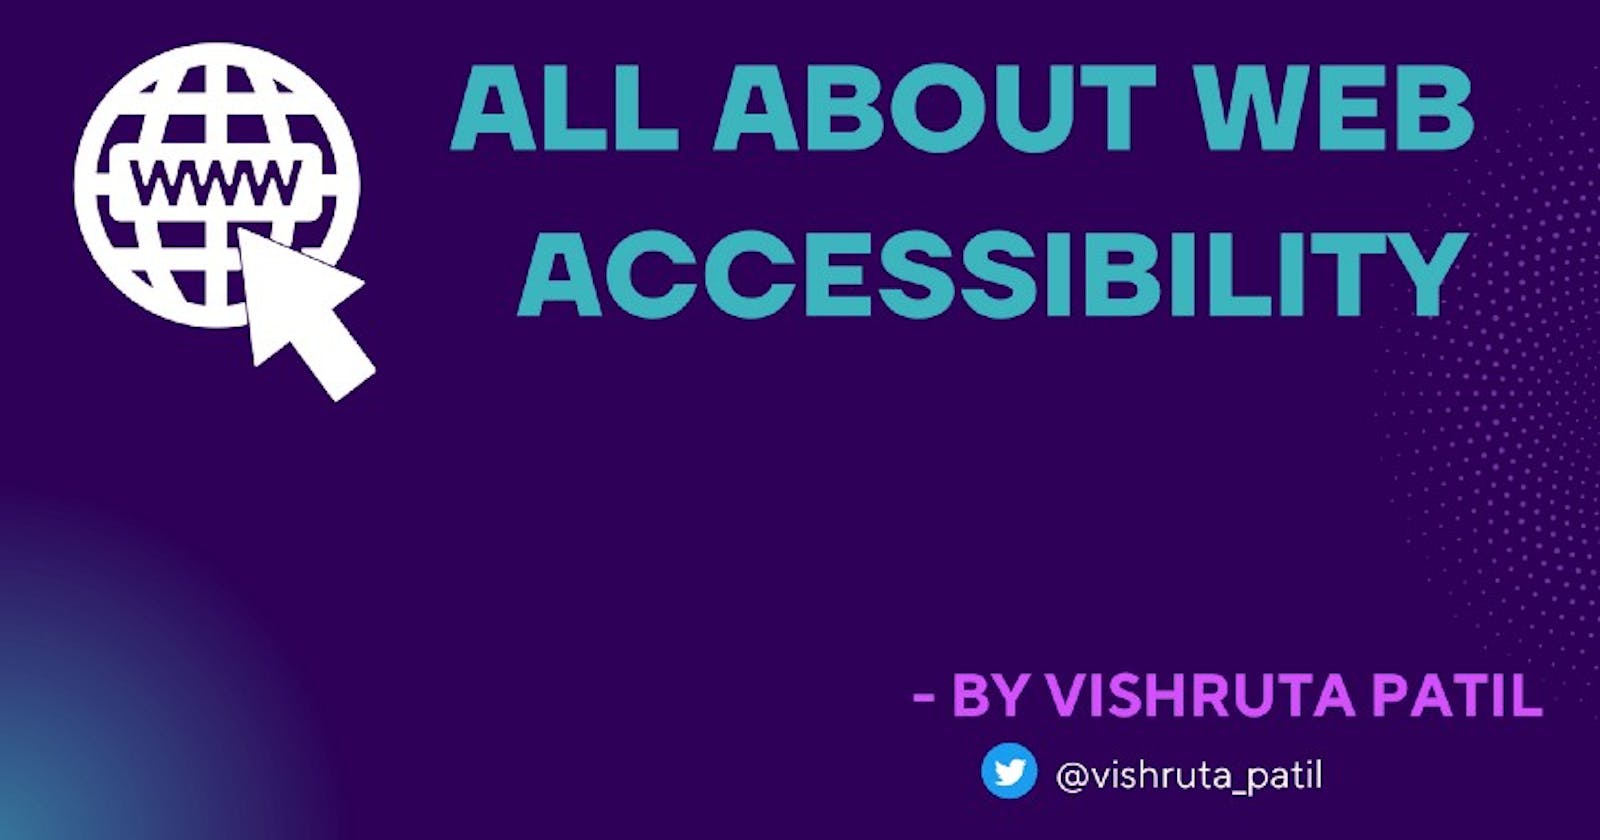 All About WEB Accessibility